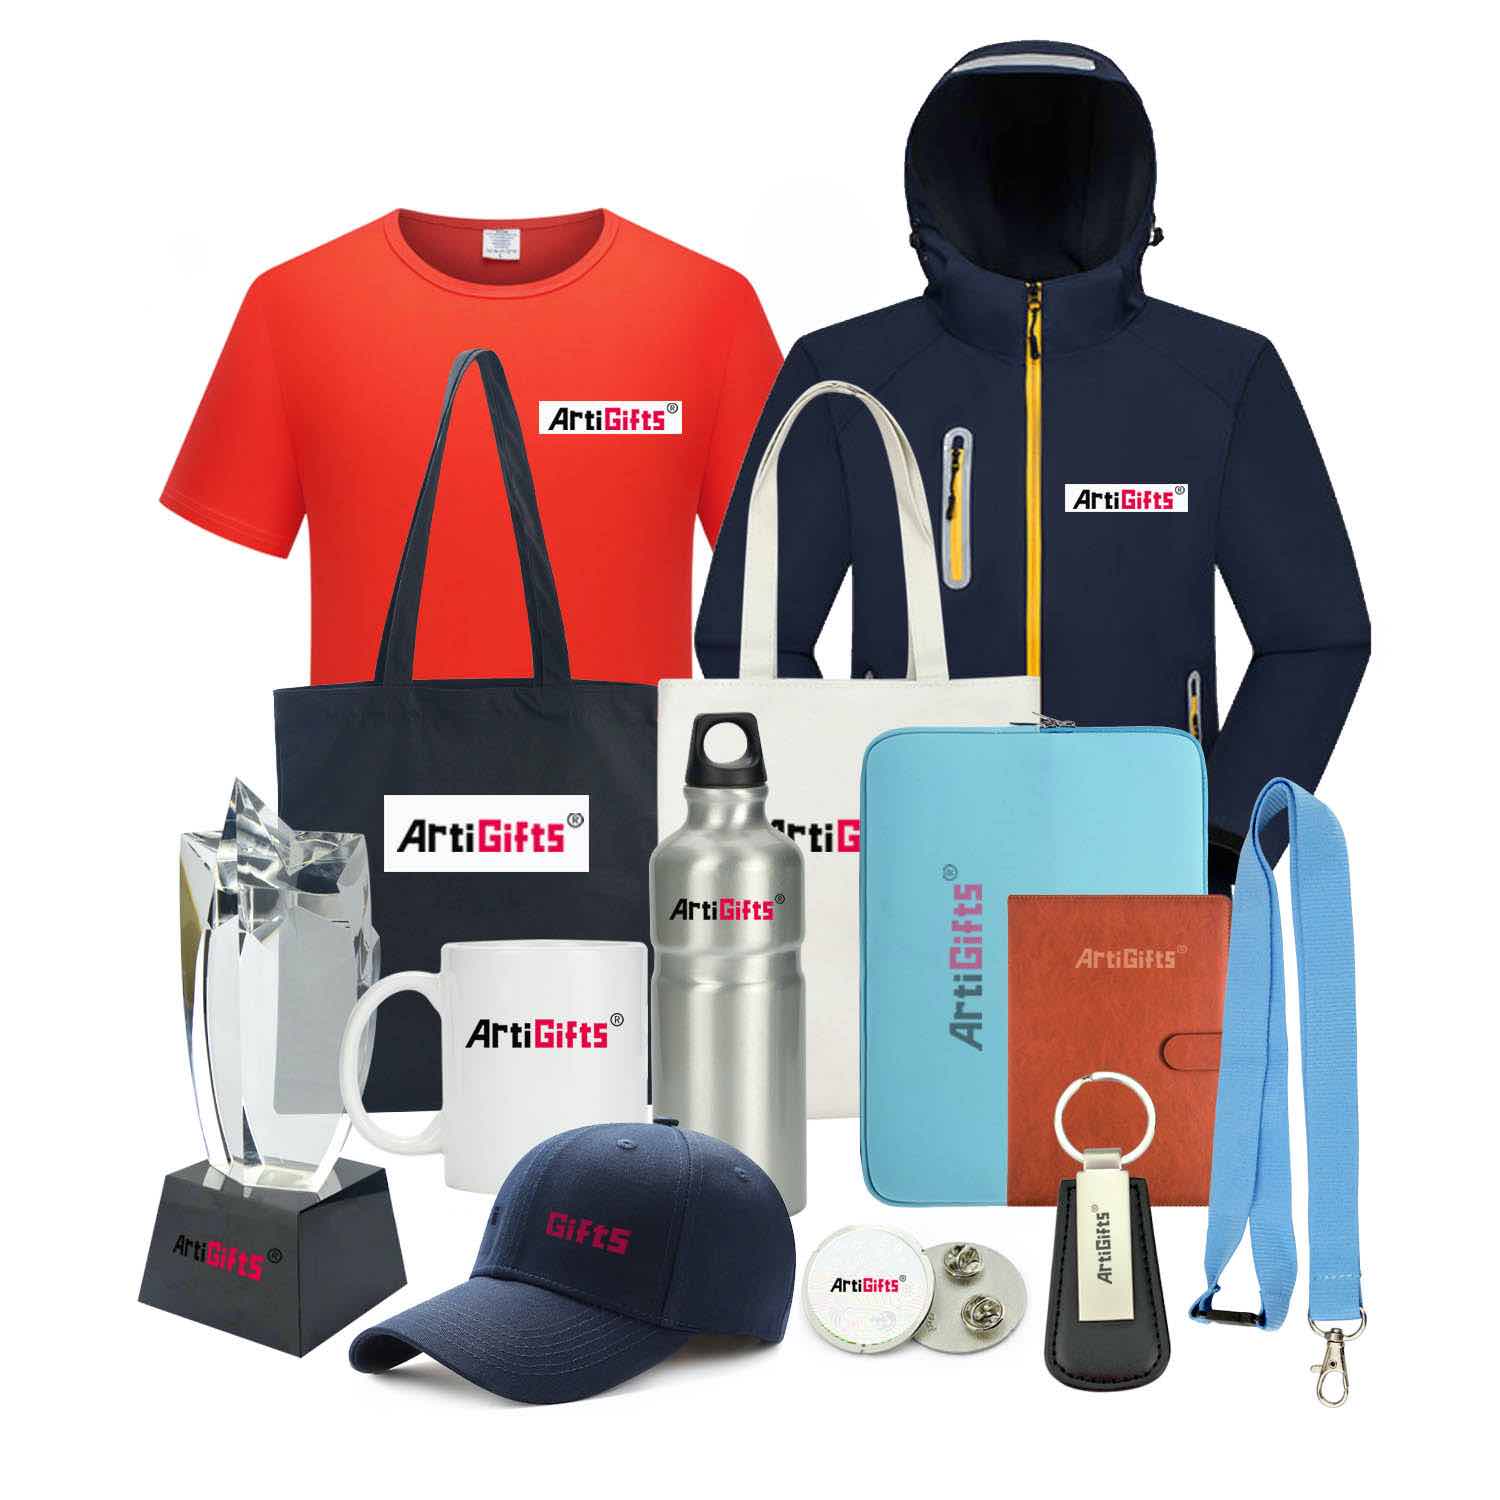 Promotional Gift Items Dubai | Promotional Gift Suppliers In Dubai